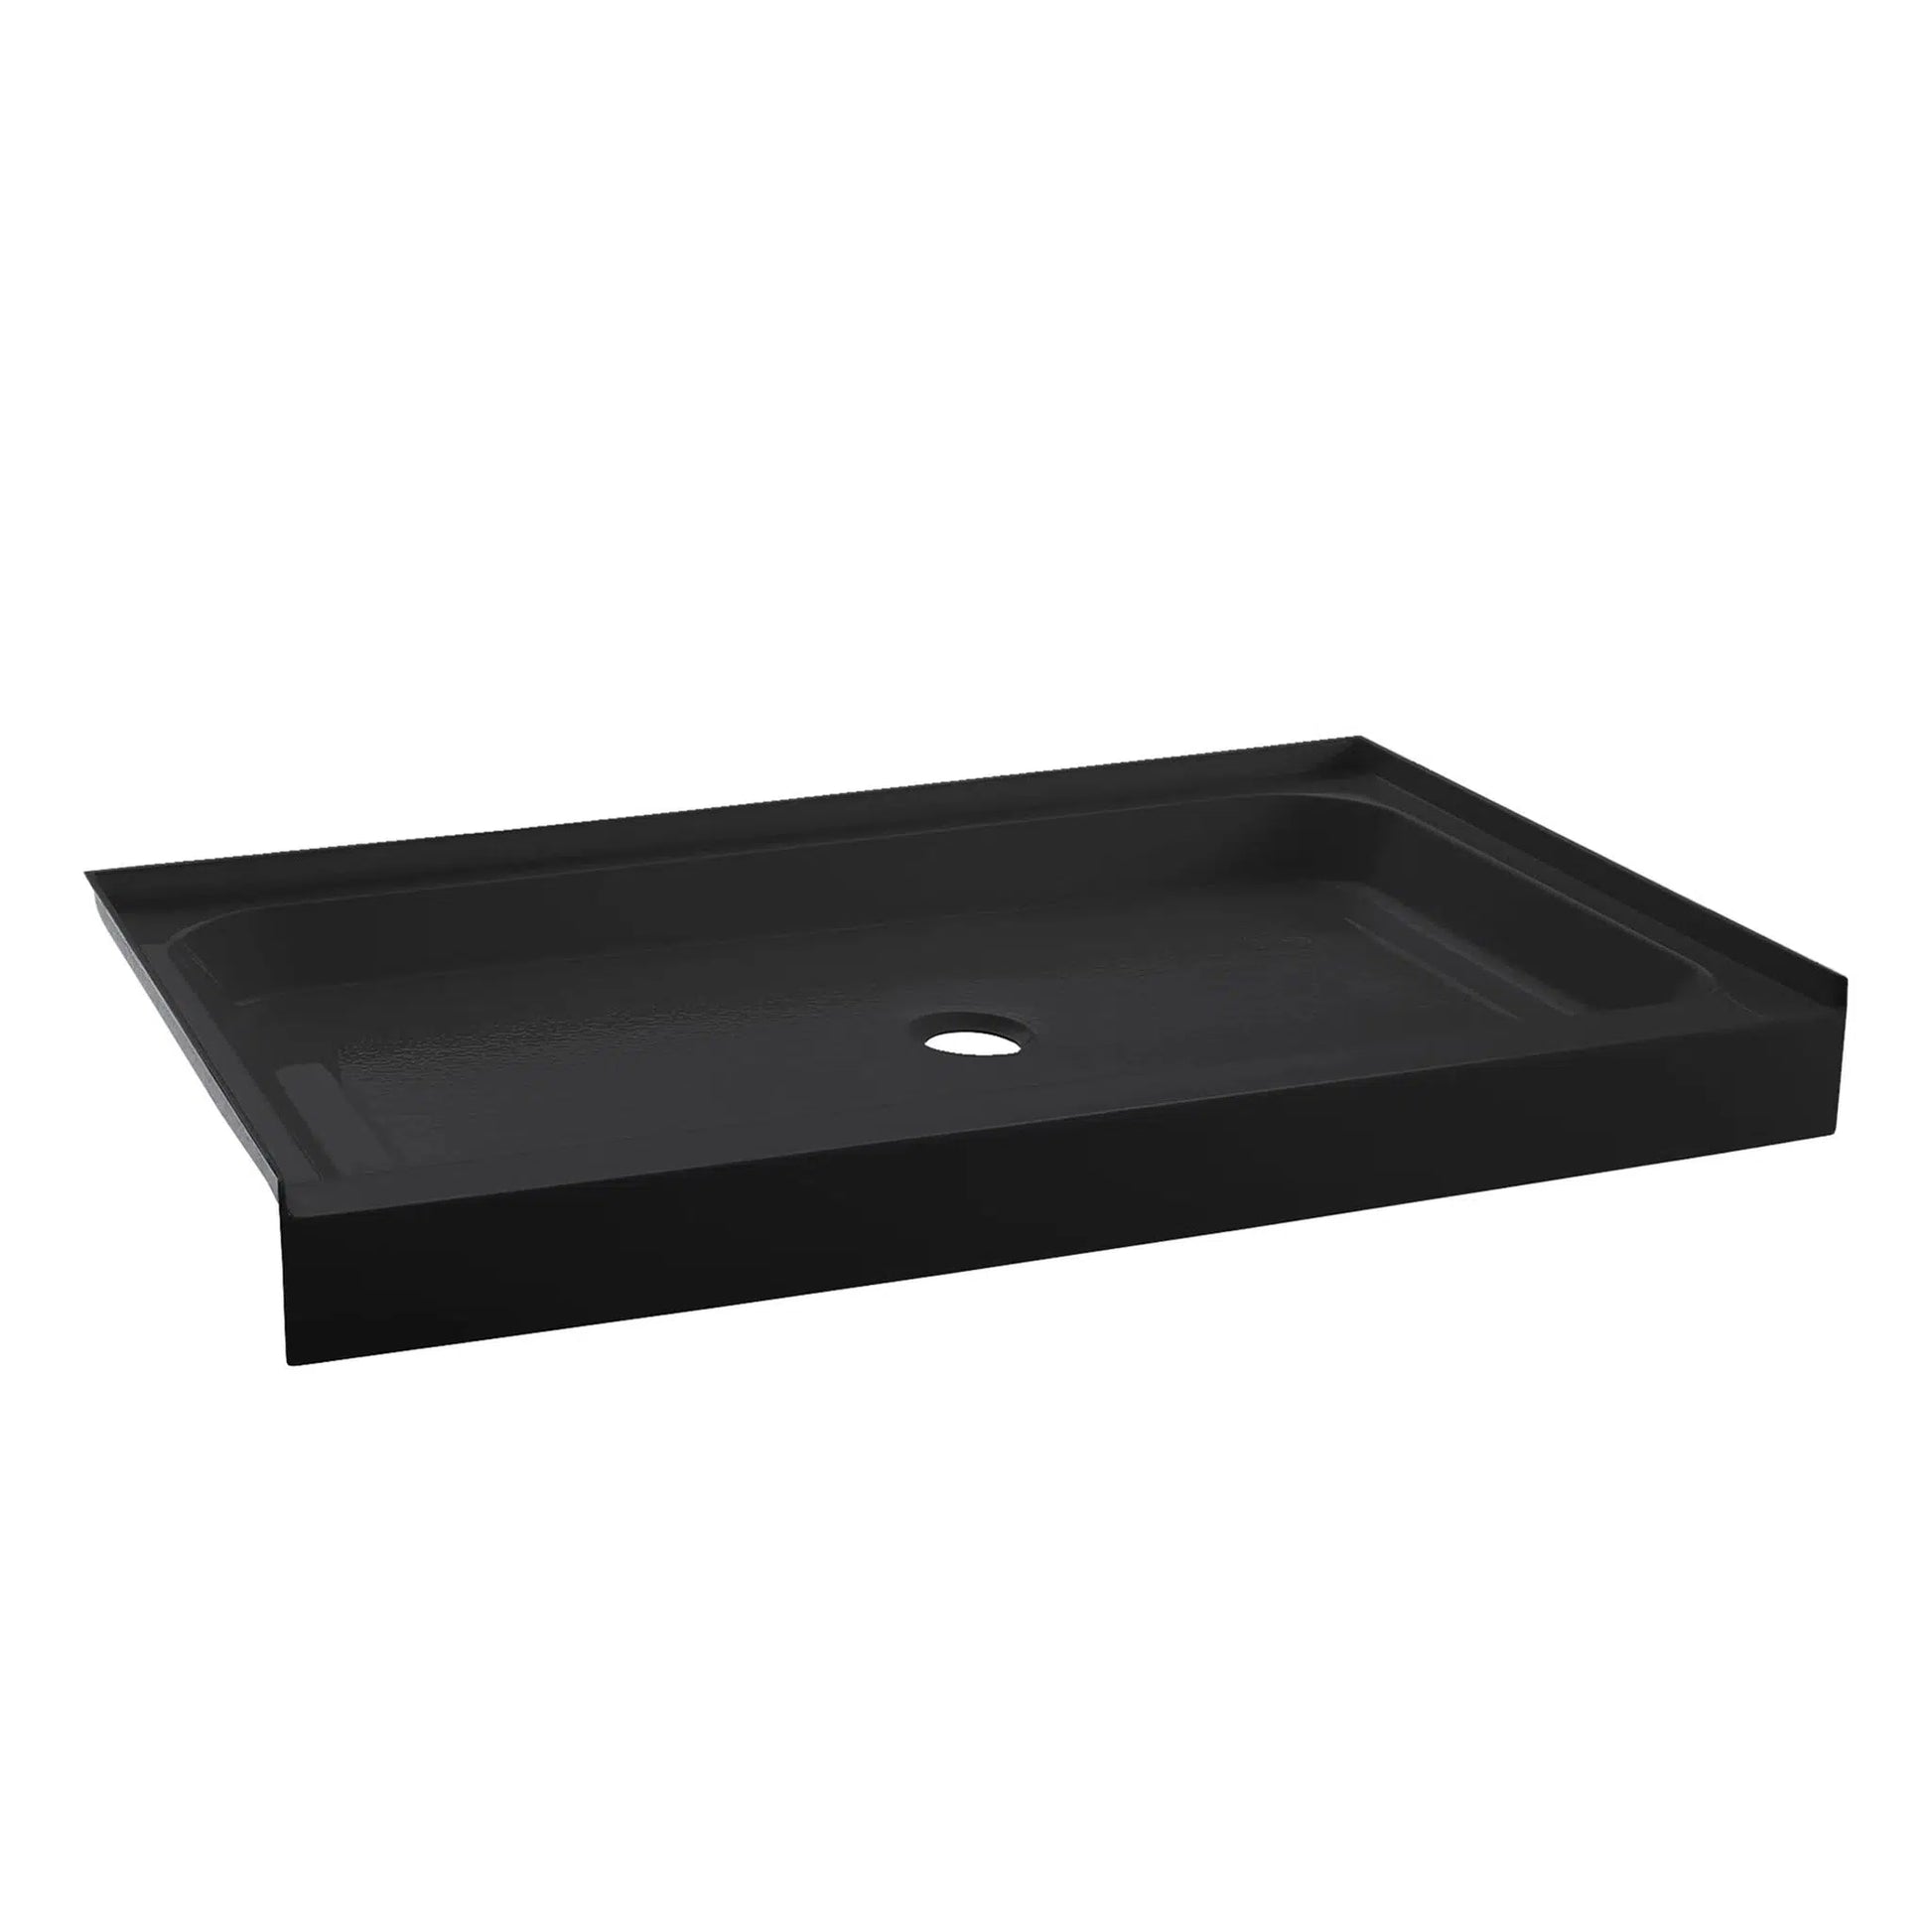 Swiss Madison Voltaire 48" x 36" Three-Wall Alcove Black Center Drain Shower Base With Built-In Integral Flange